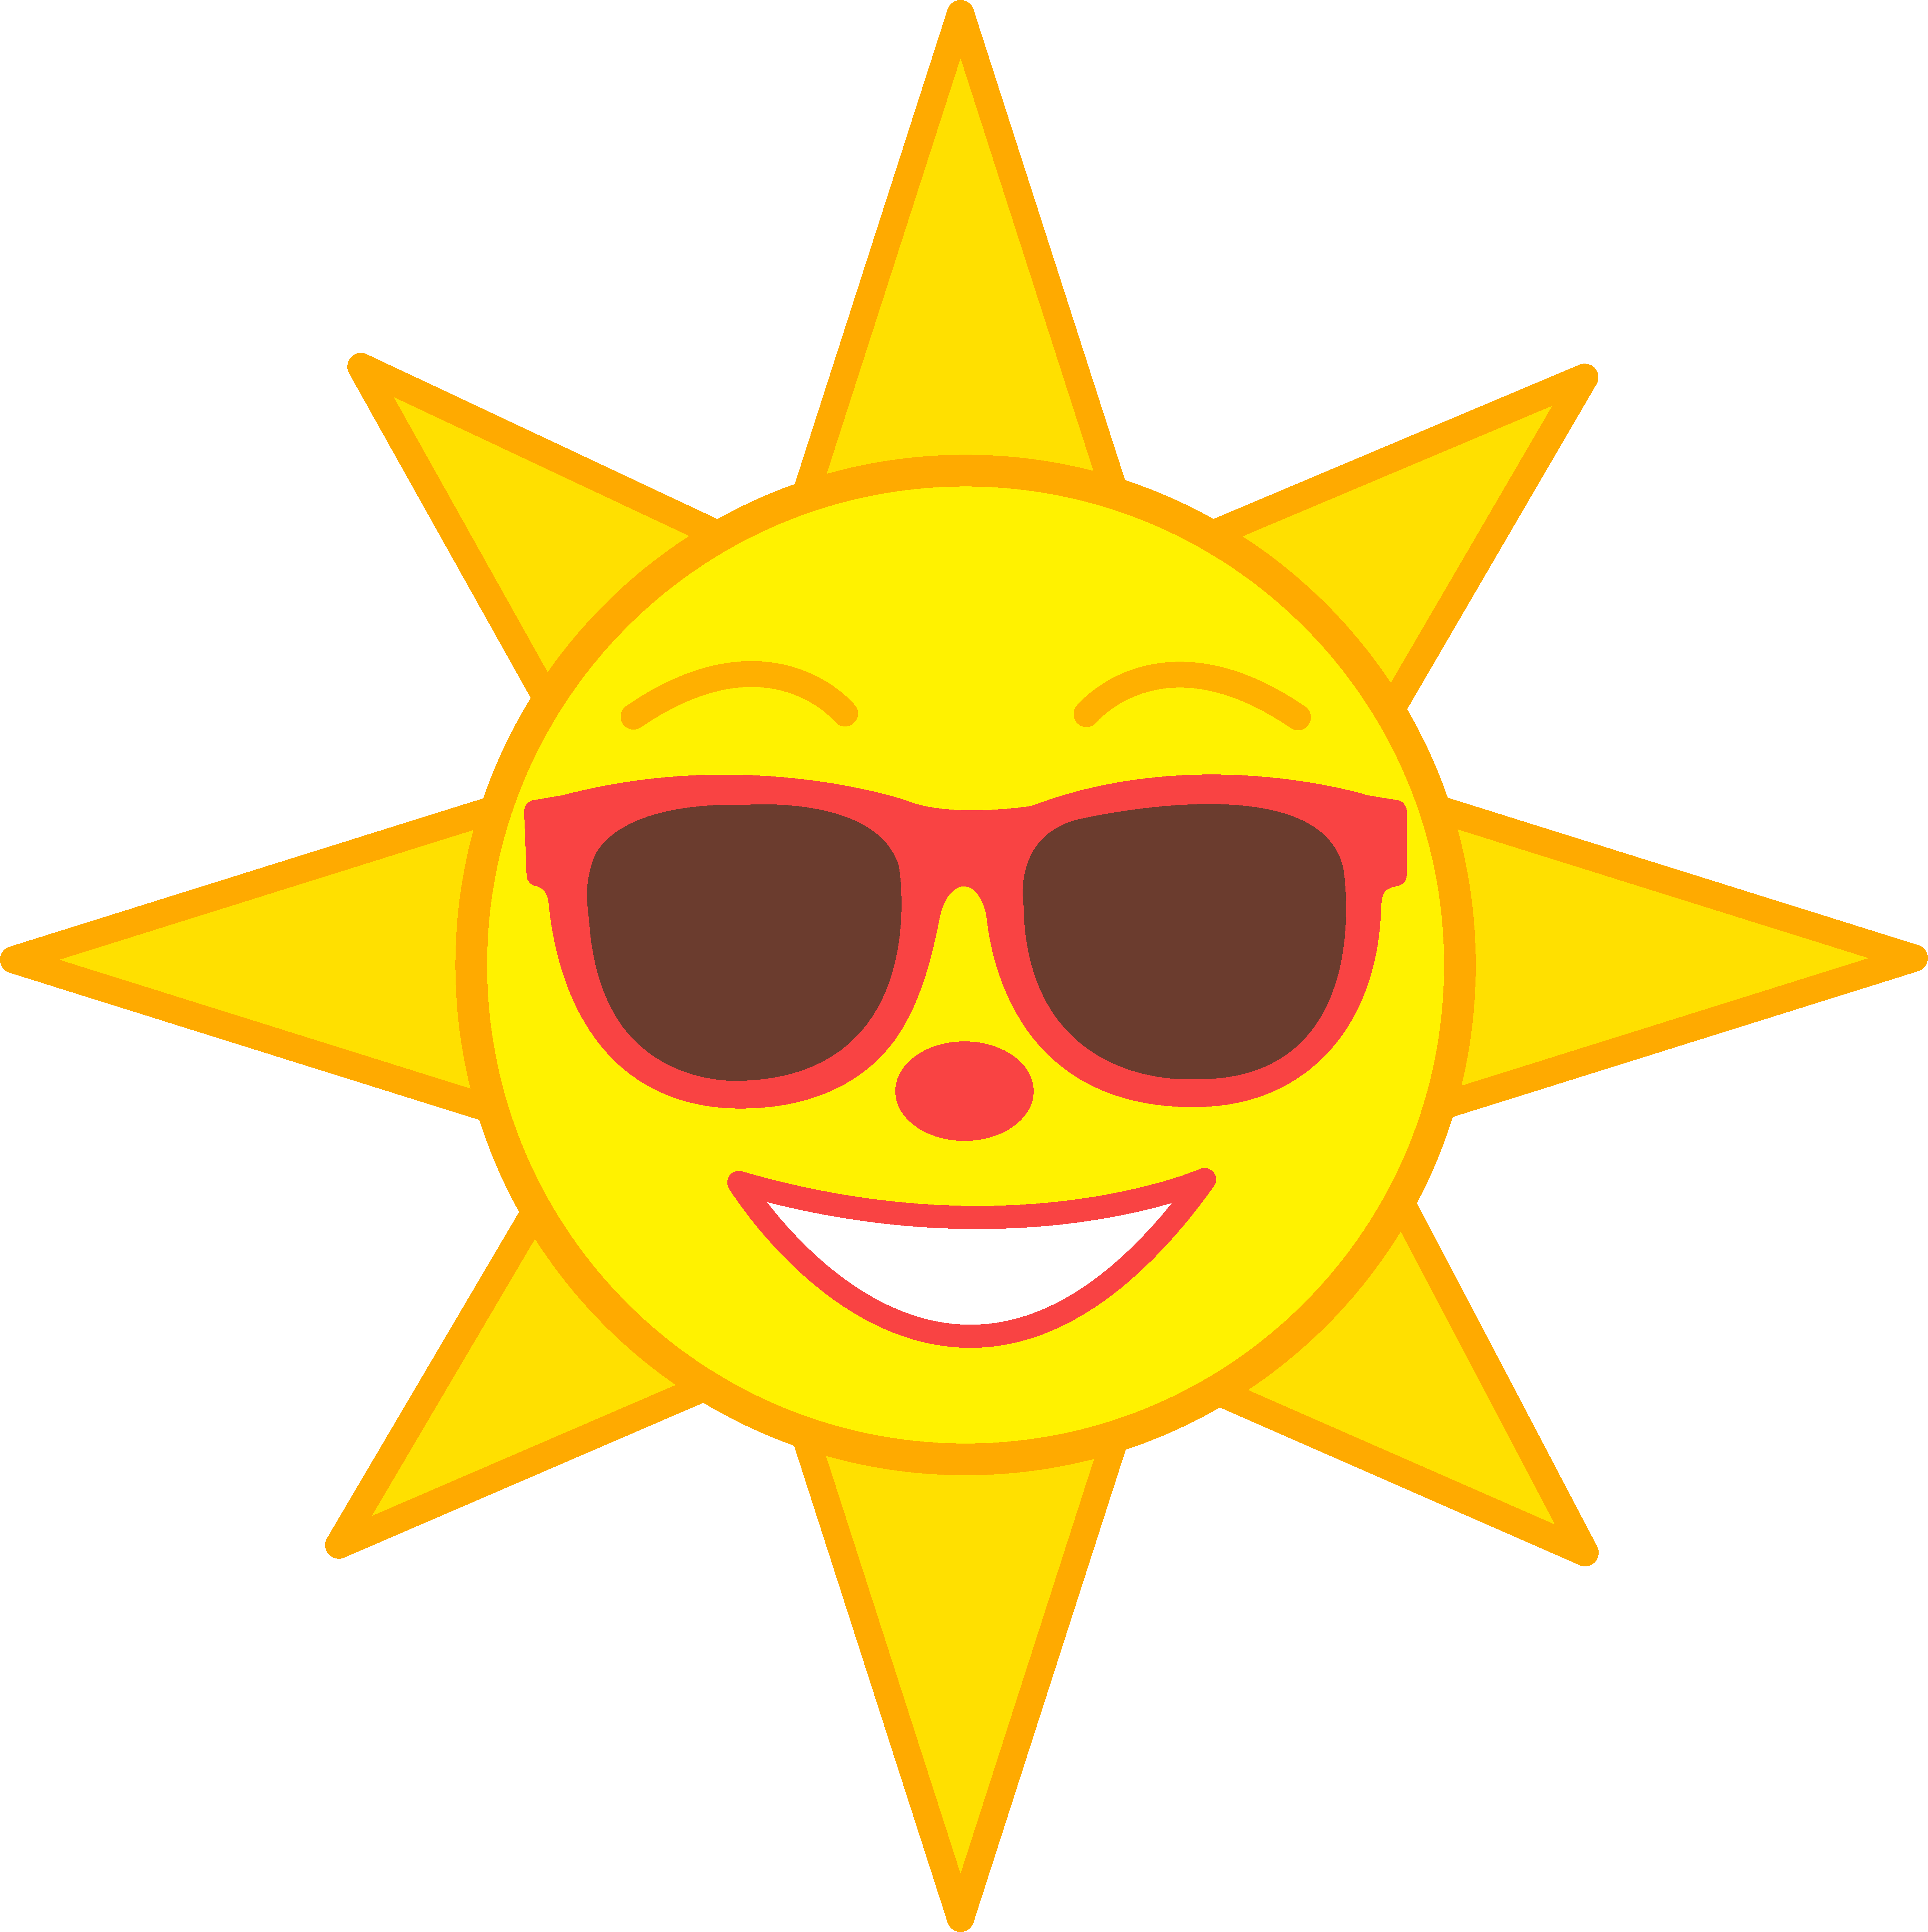 Free Sun With Sunglasses Clipart, Download Free Clip Art